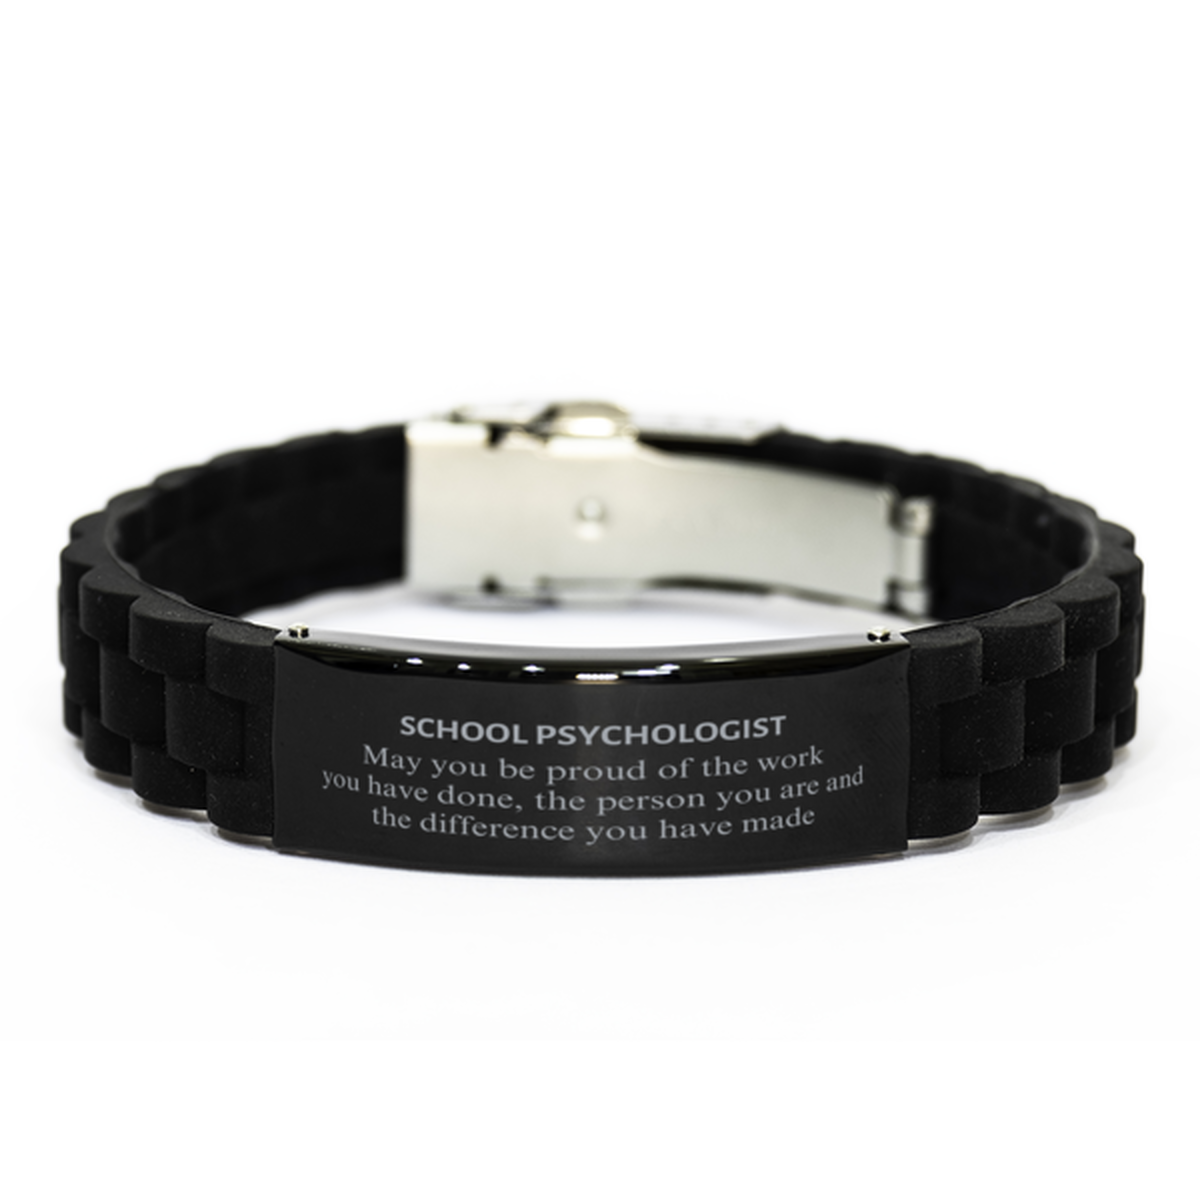 School Psychologist May you be proud of the work you have done, Retirement School Psychologist Black Glidelock Clasp Bracelet for Colleague Appreciation Gifts Amazing for School Psychologist